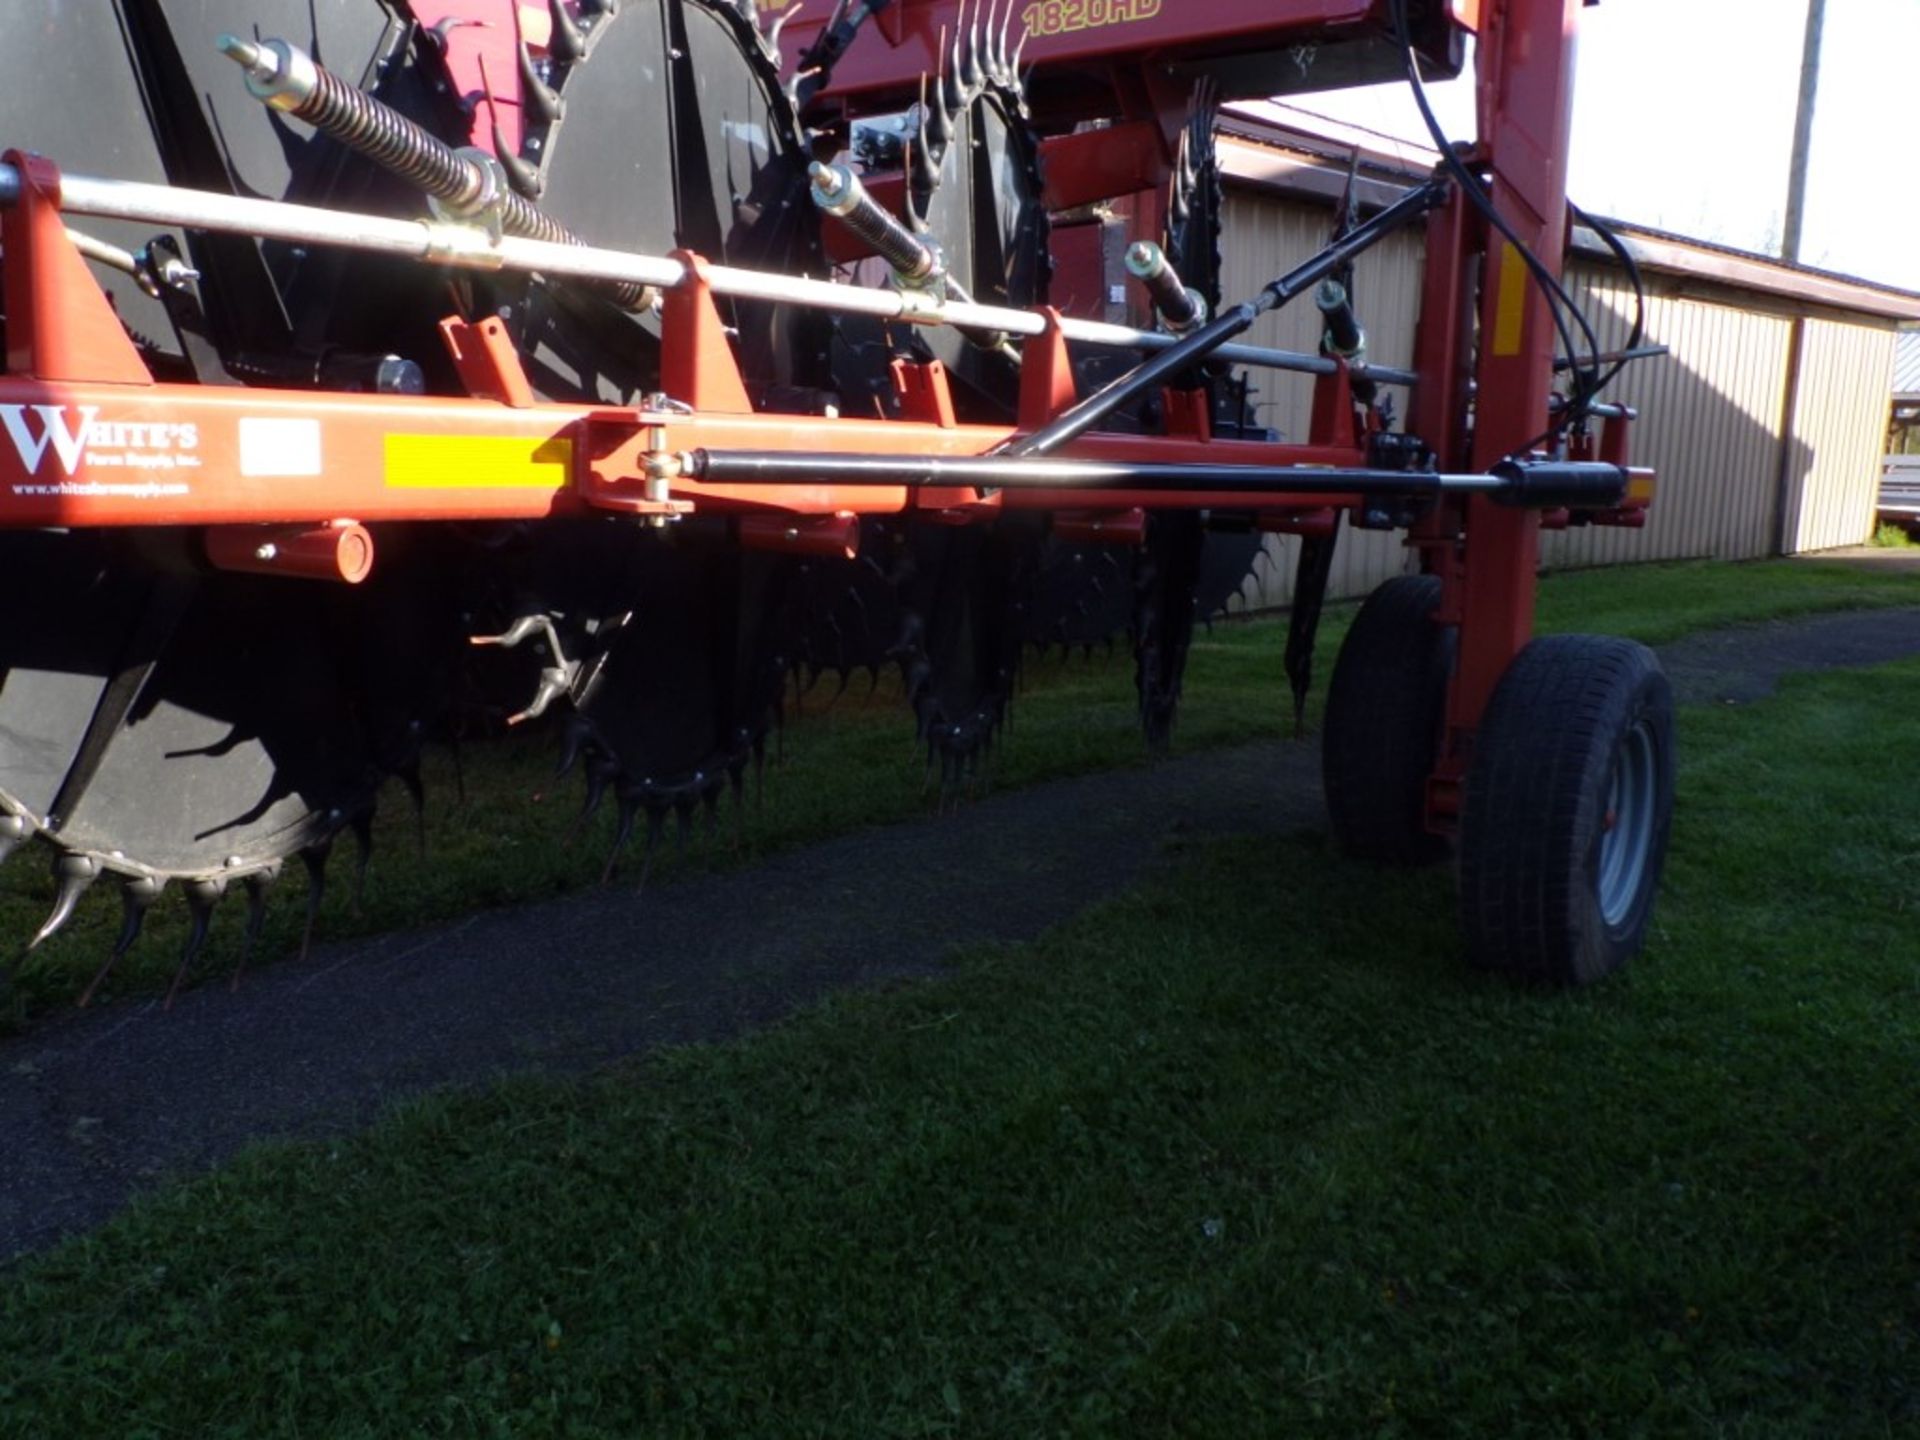 Pequea Windro Pro 1820HD Hyd. Folding Wheel Rake, 17-Wheel -Excellent Condition, Like New (6648) - Image 2 of 4